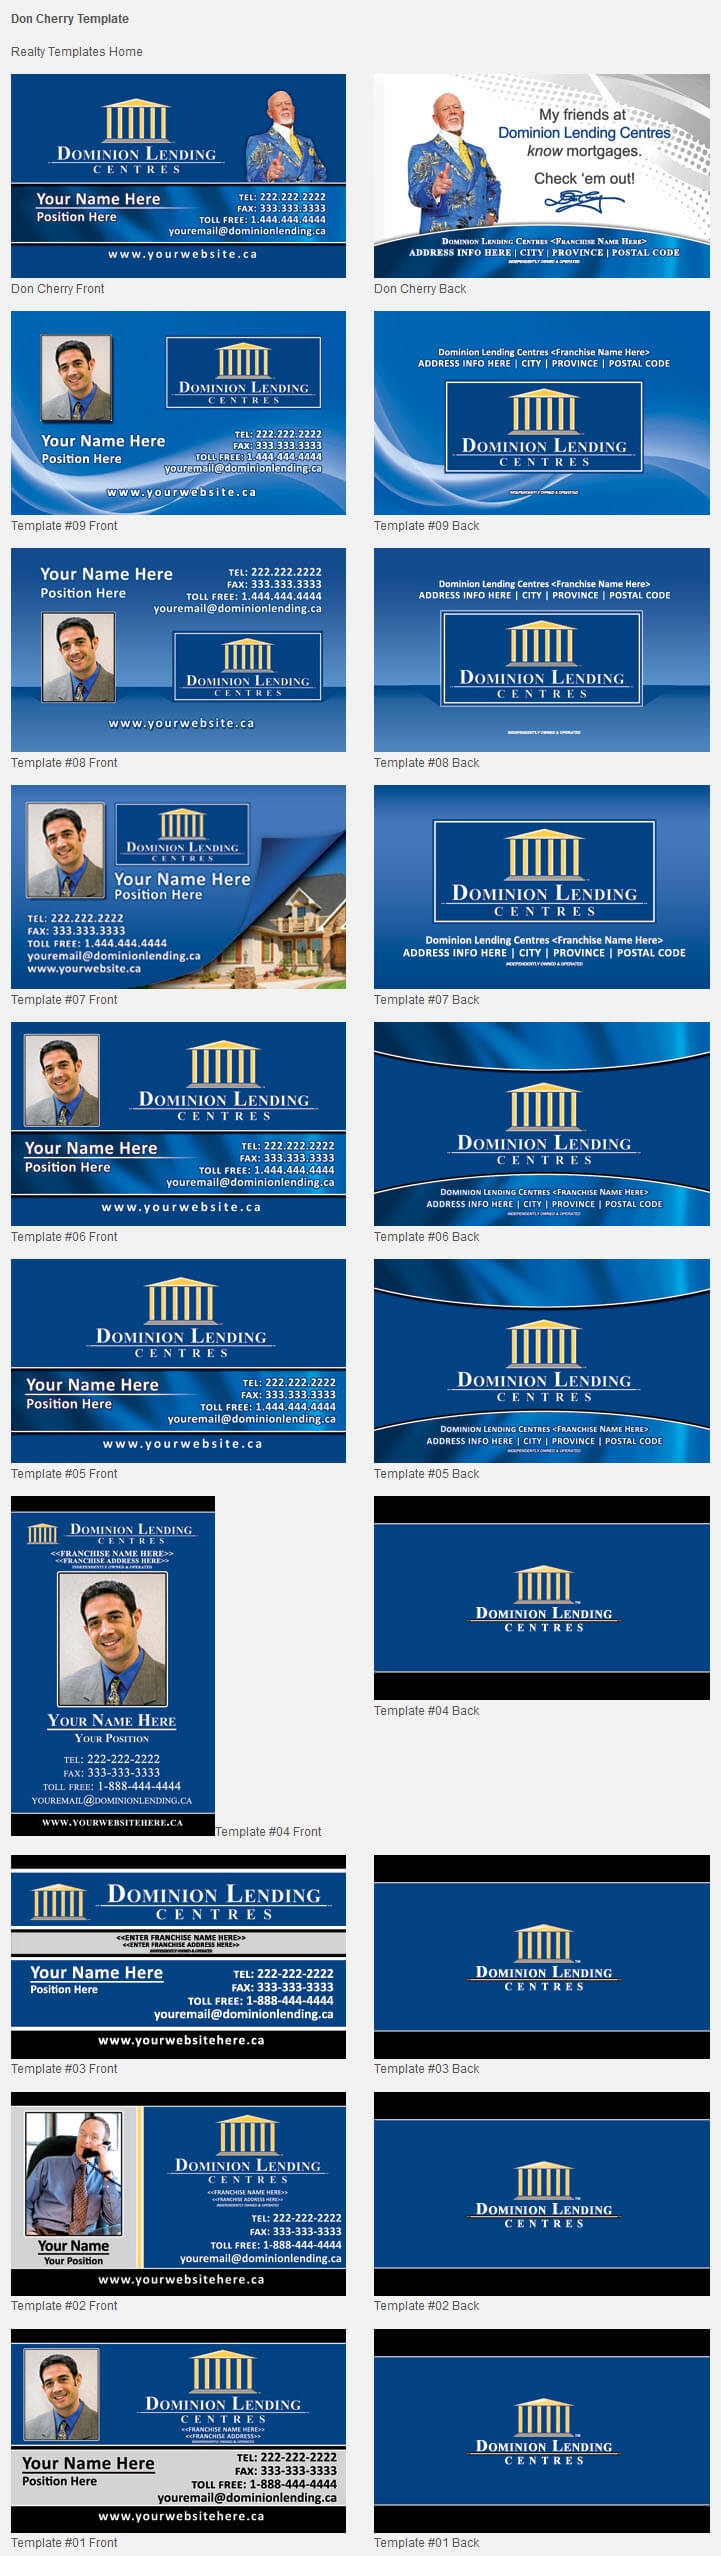 Dominion Card Template ] – Cardview Net Business Card Amp With Regard To Dominion Card Template